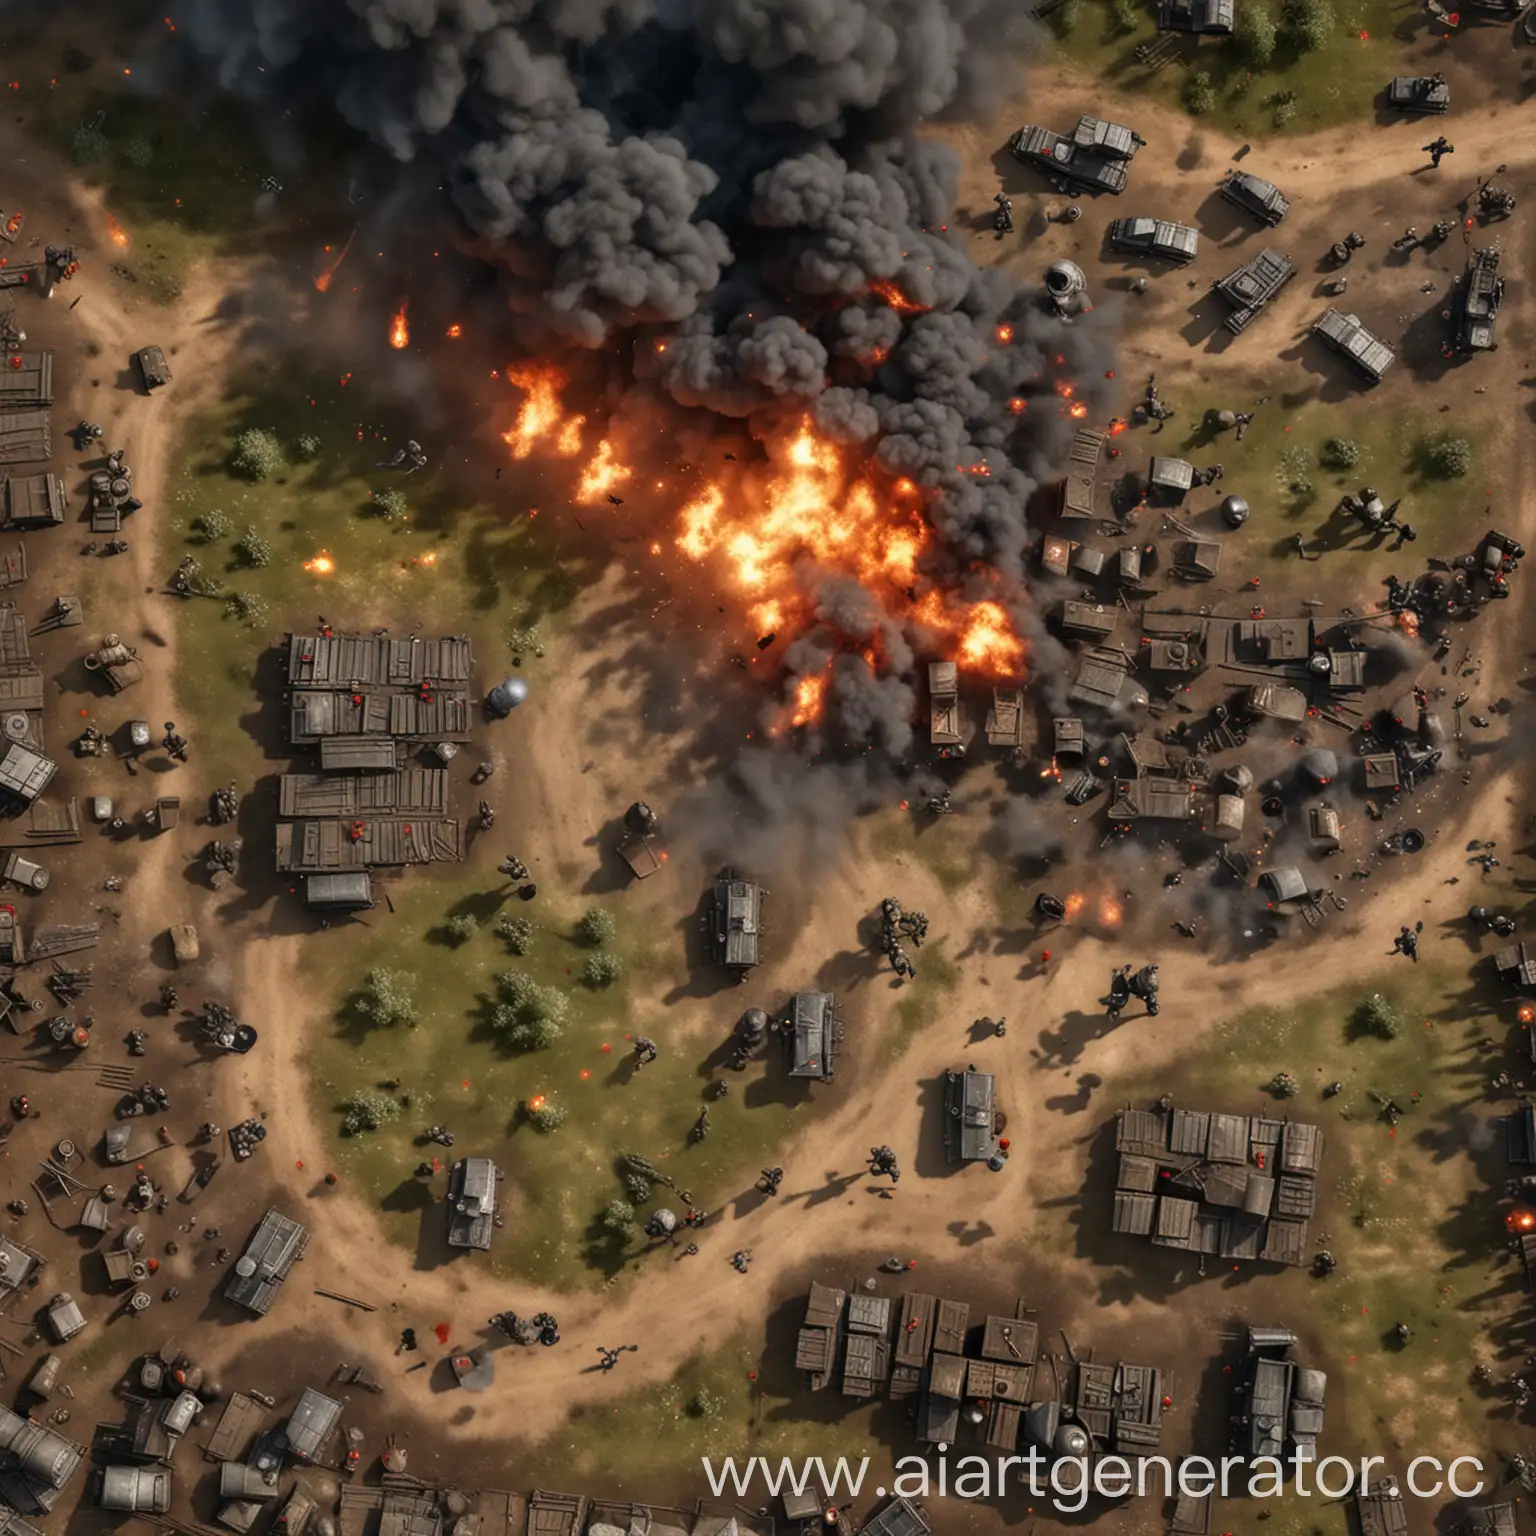 2D top-down game, realistic war painting style. Soldiers on a battlefield, USSR tanks, trenches, smoke, explosions. Inspired by  Albrecht Altdorfer 'Battle of Issus